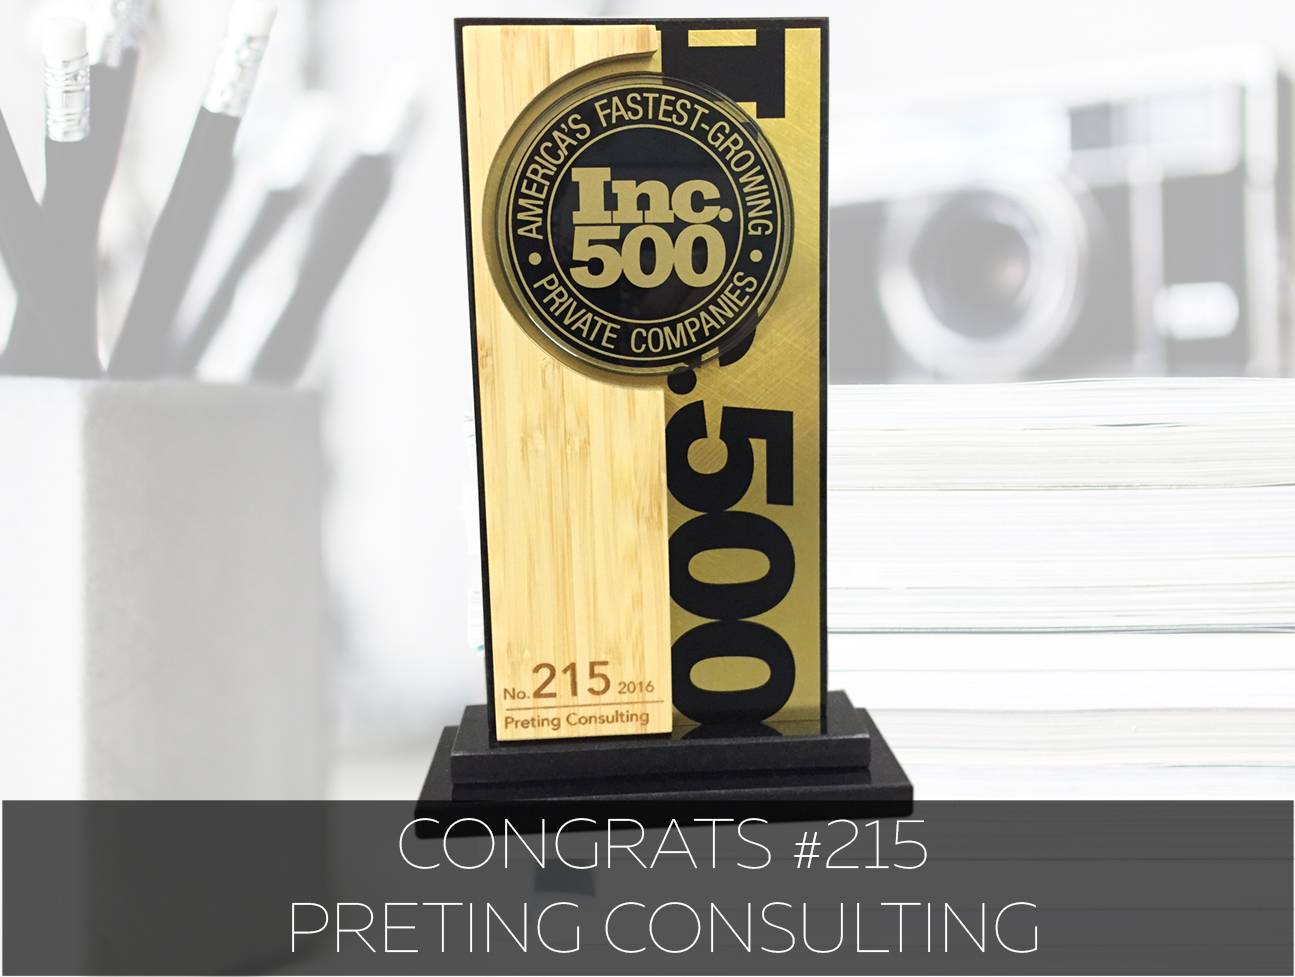 Preting Consulting Inc. 500 Award